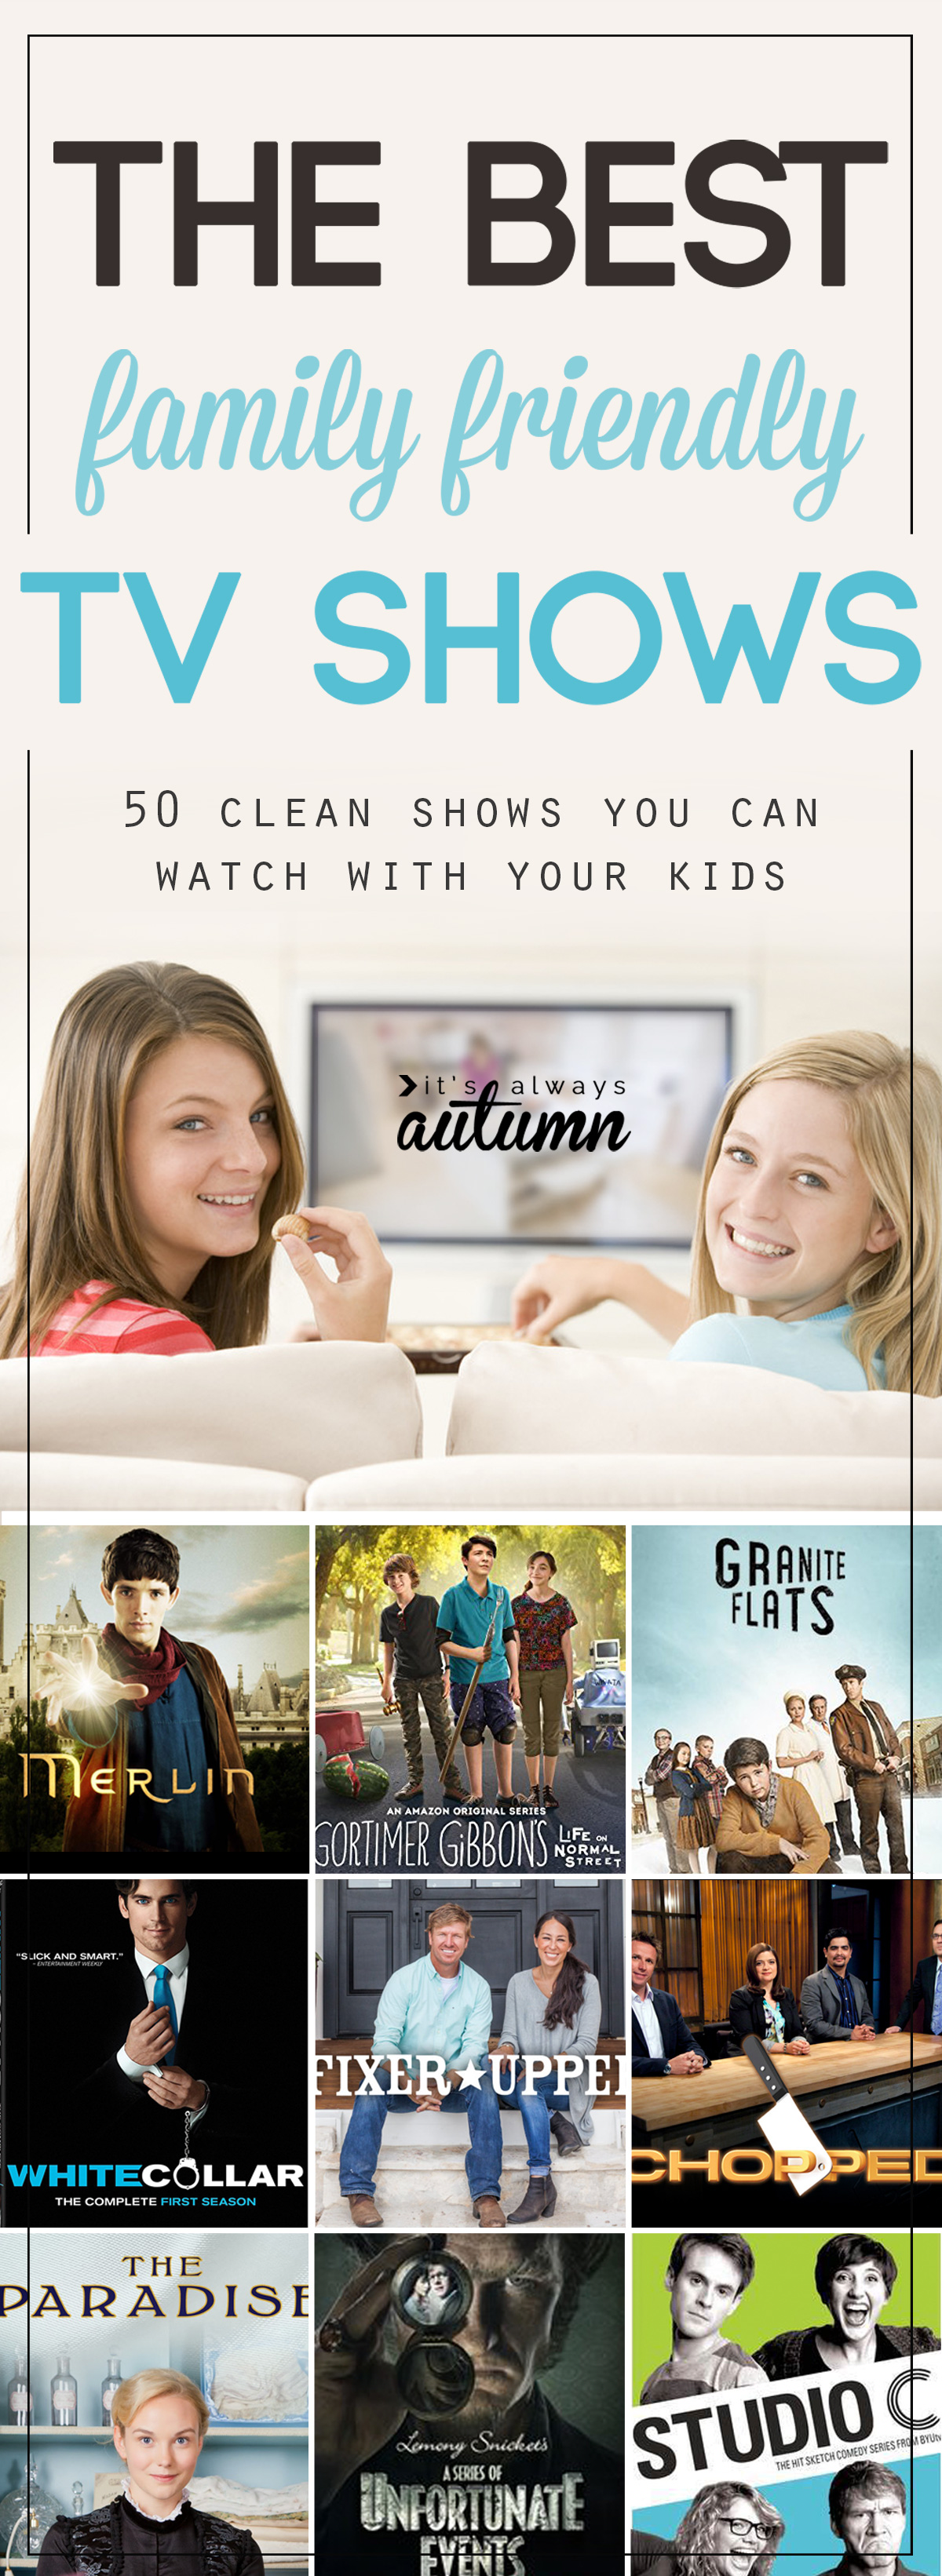 Fantastic list of family shows that are clean enough to watch with your kids!